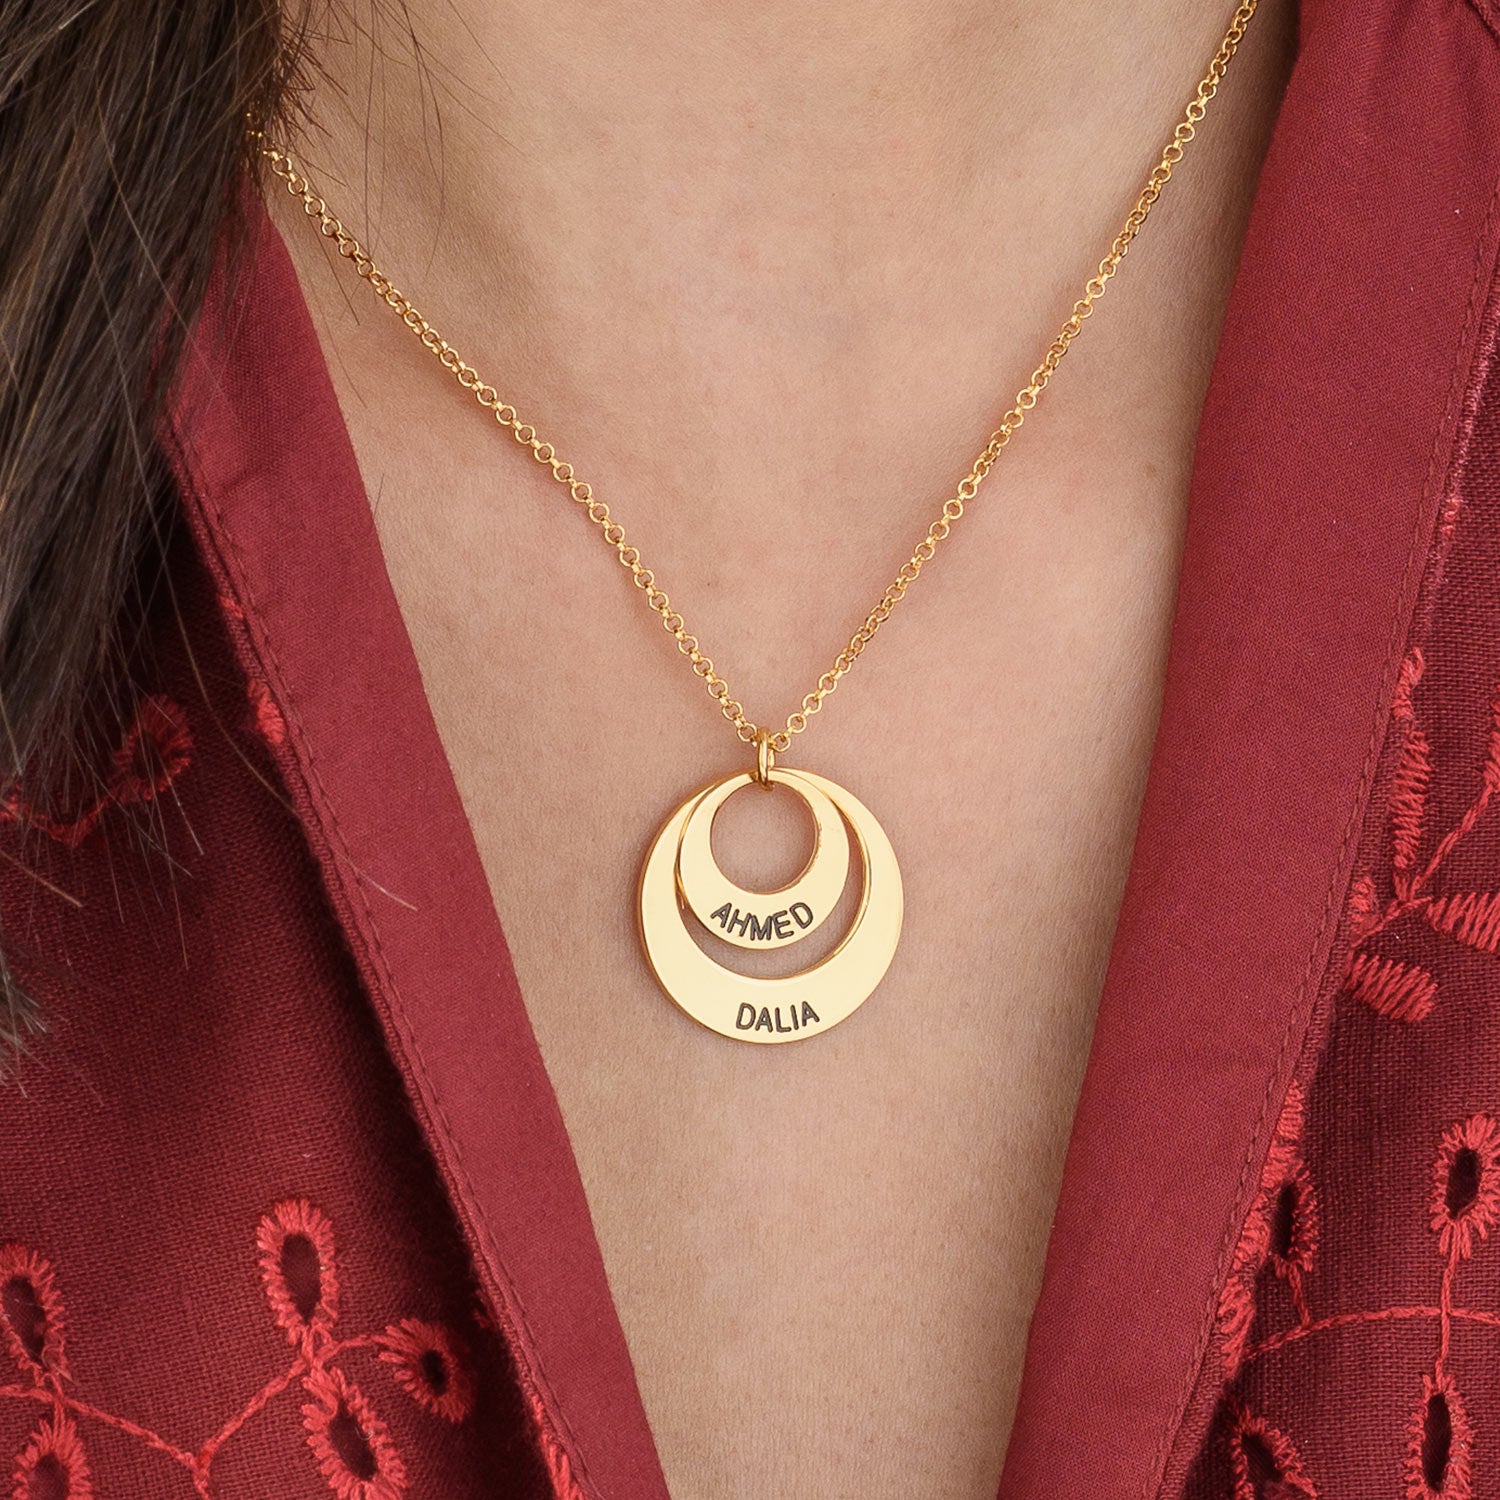 Mum's Jewelry - Gold Plated Disc Necklace